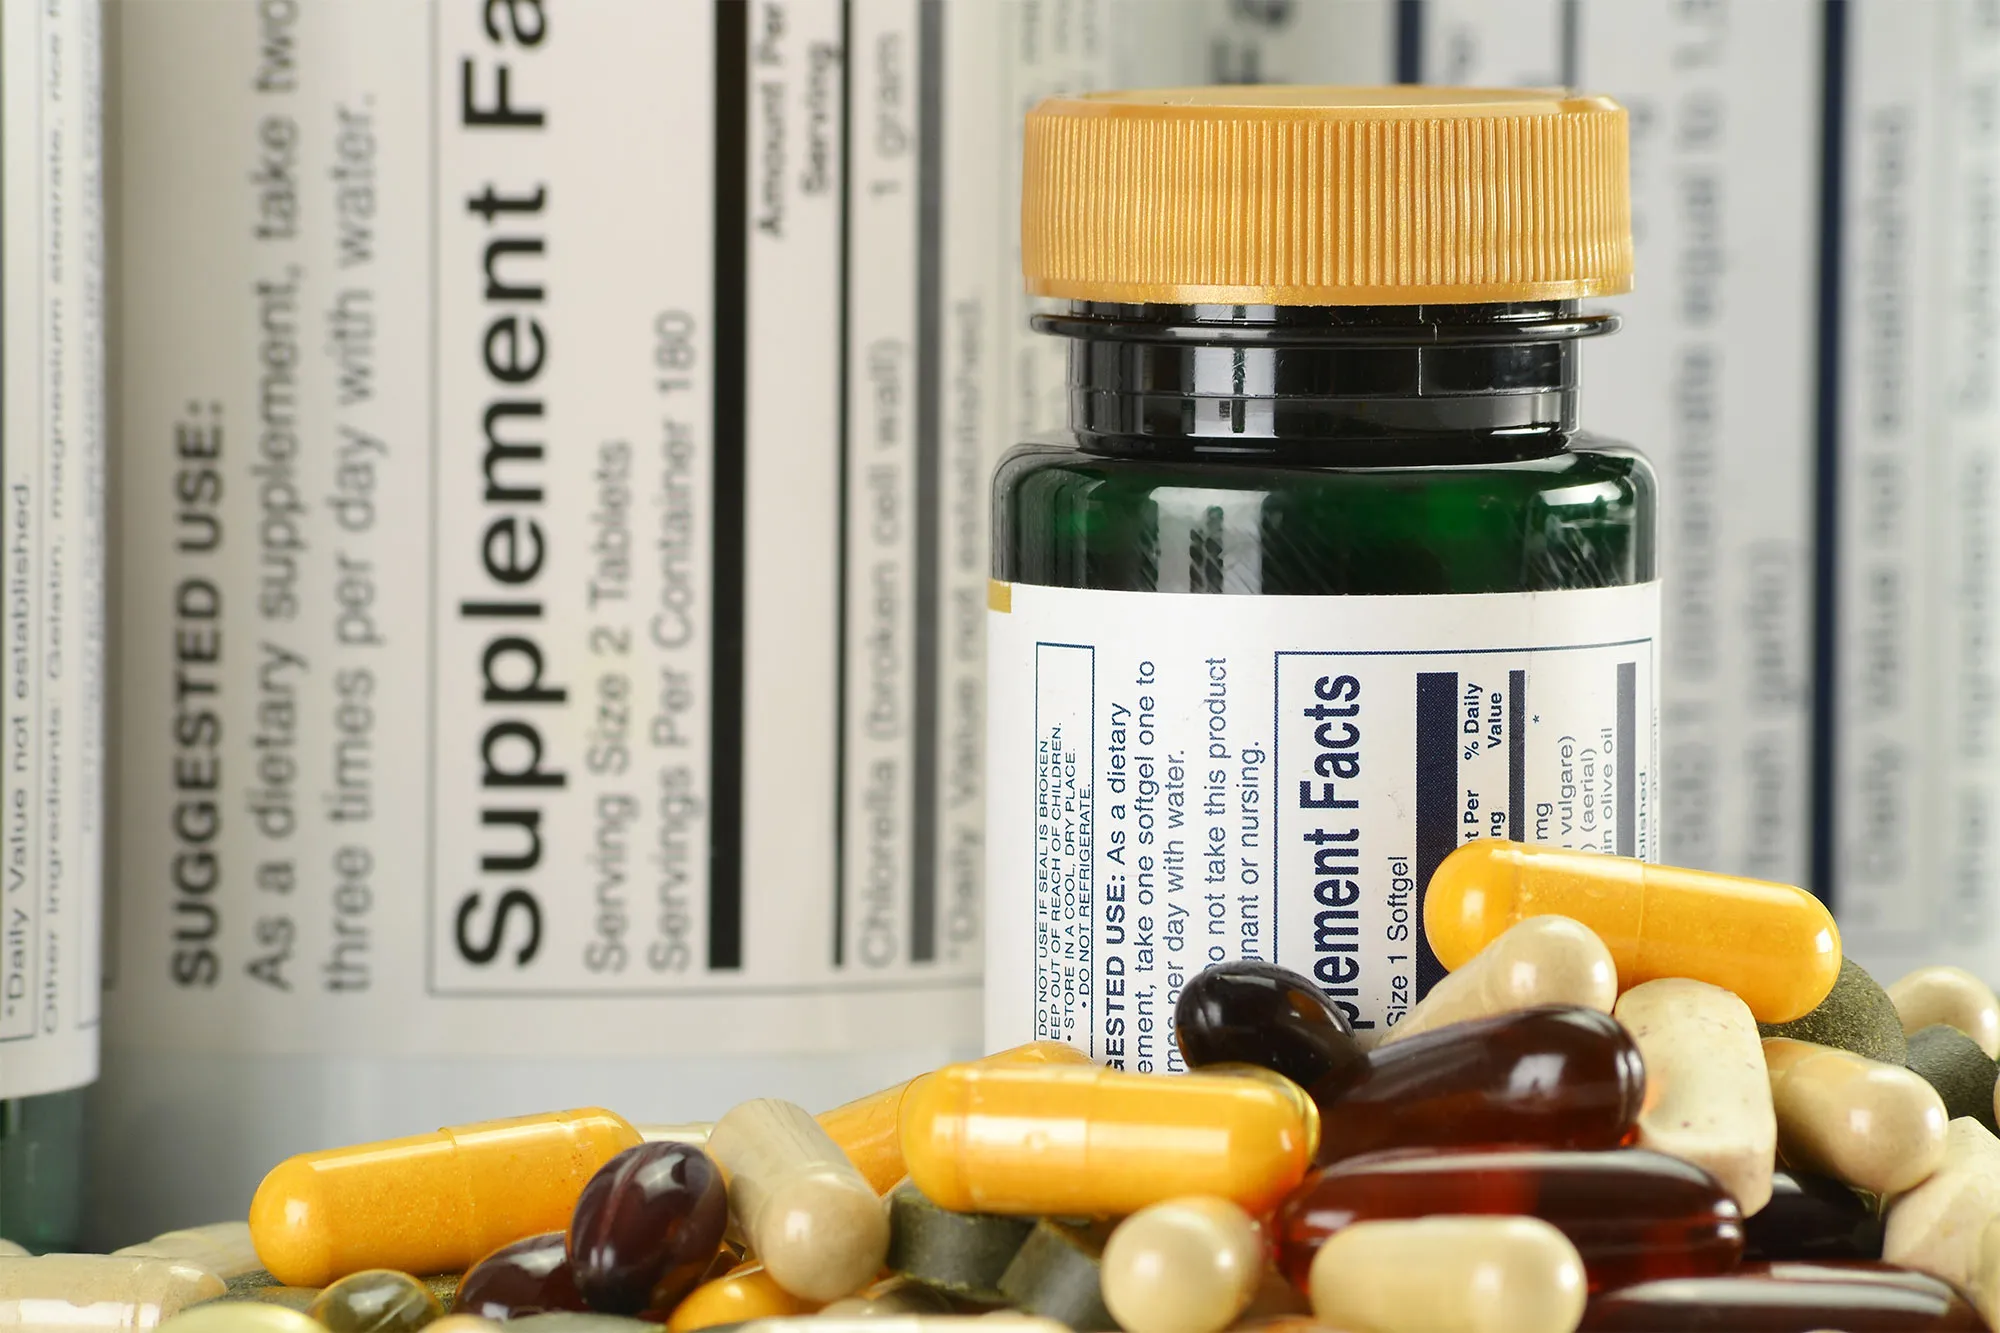 “The Facts About Supplements for Seniors” is locked The Facts About Supplements for Seniors